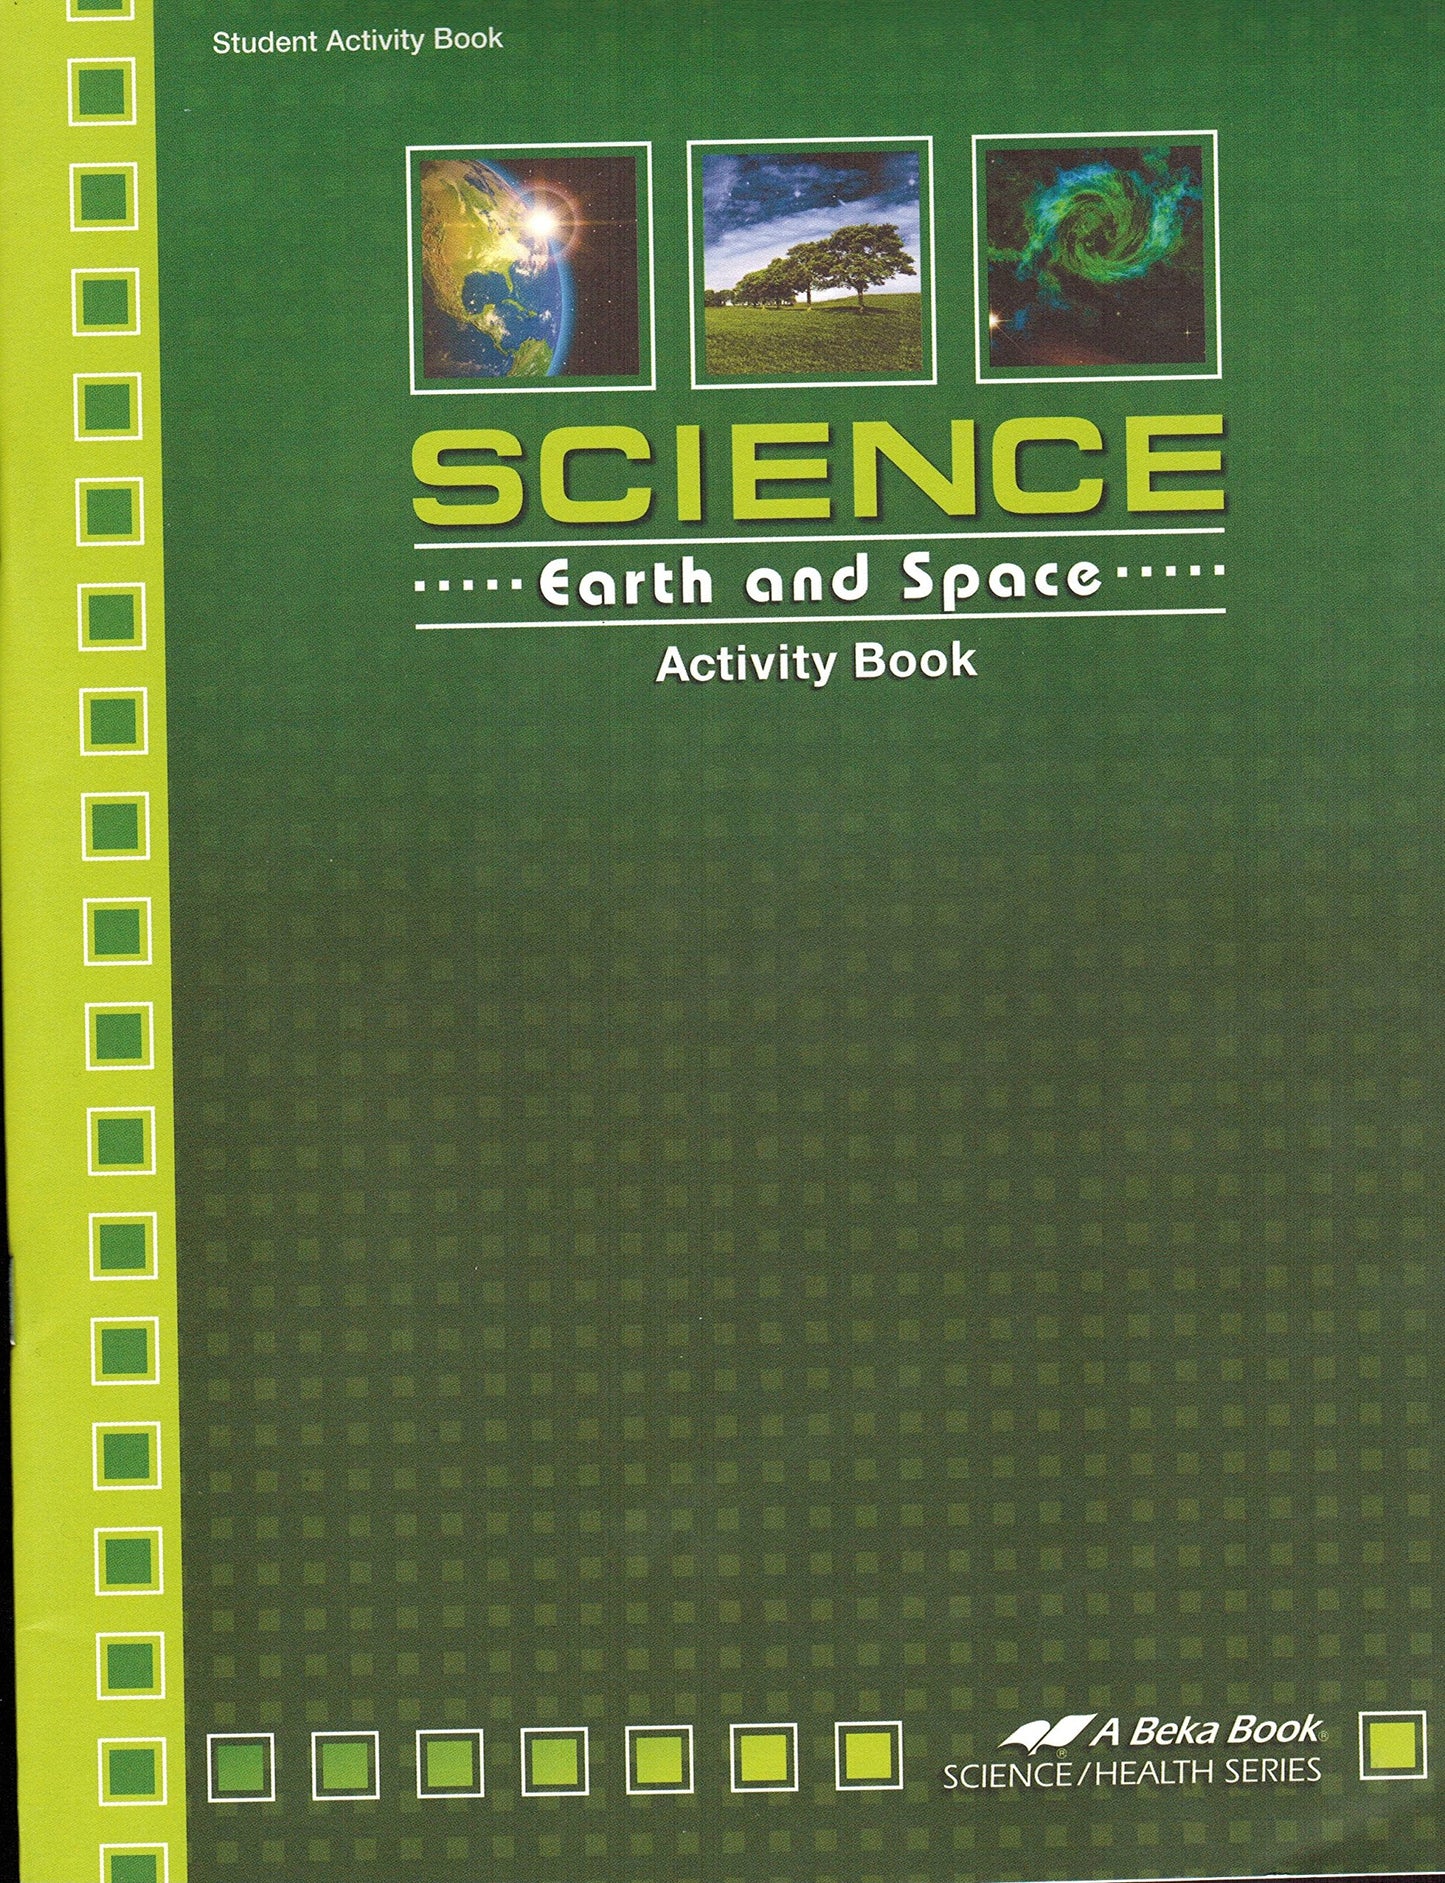 Science Earth and Space - Activity Book